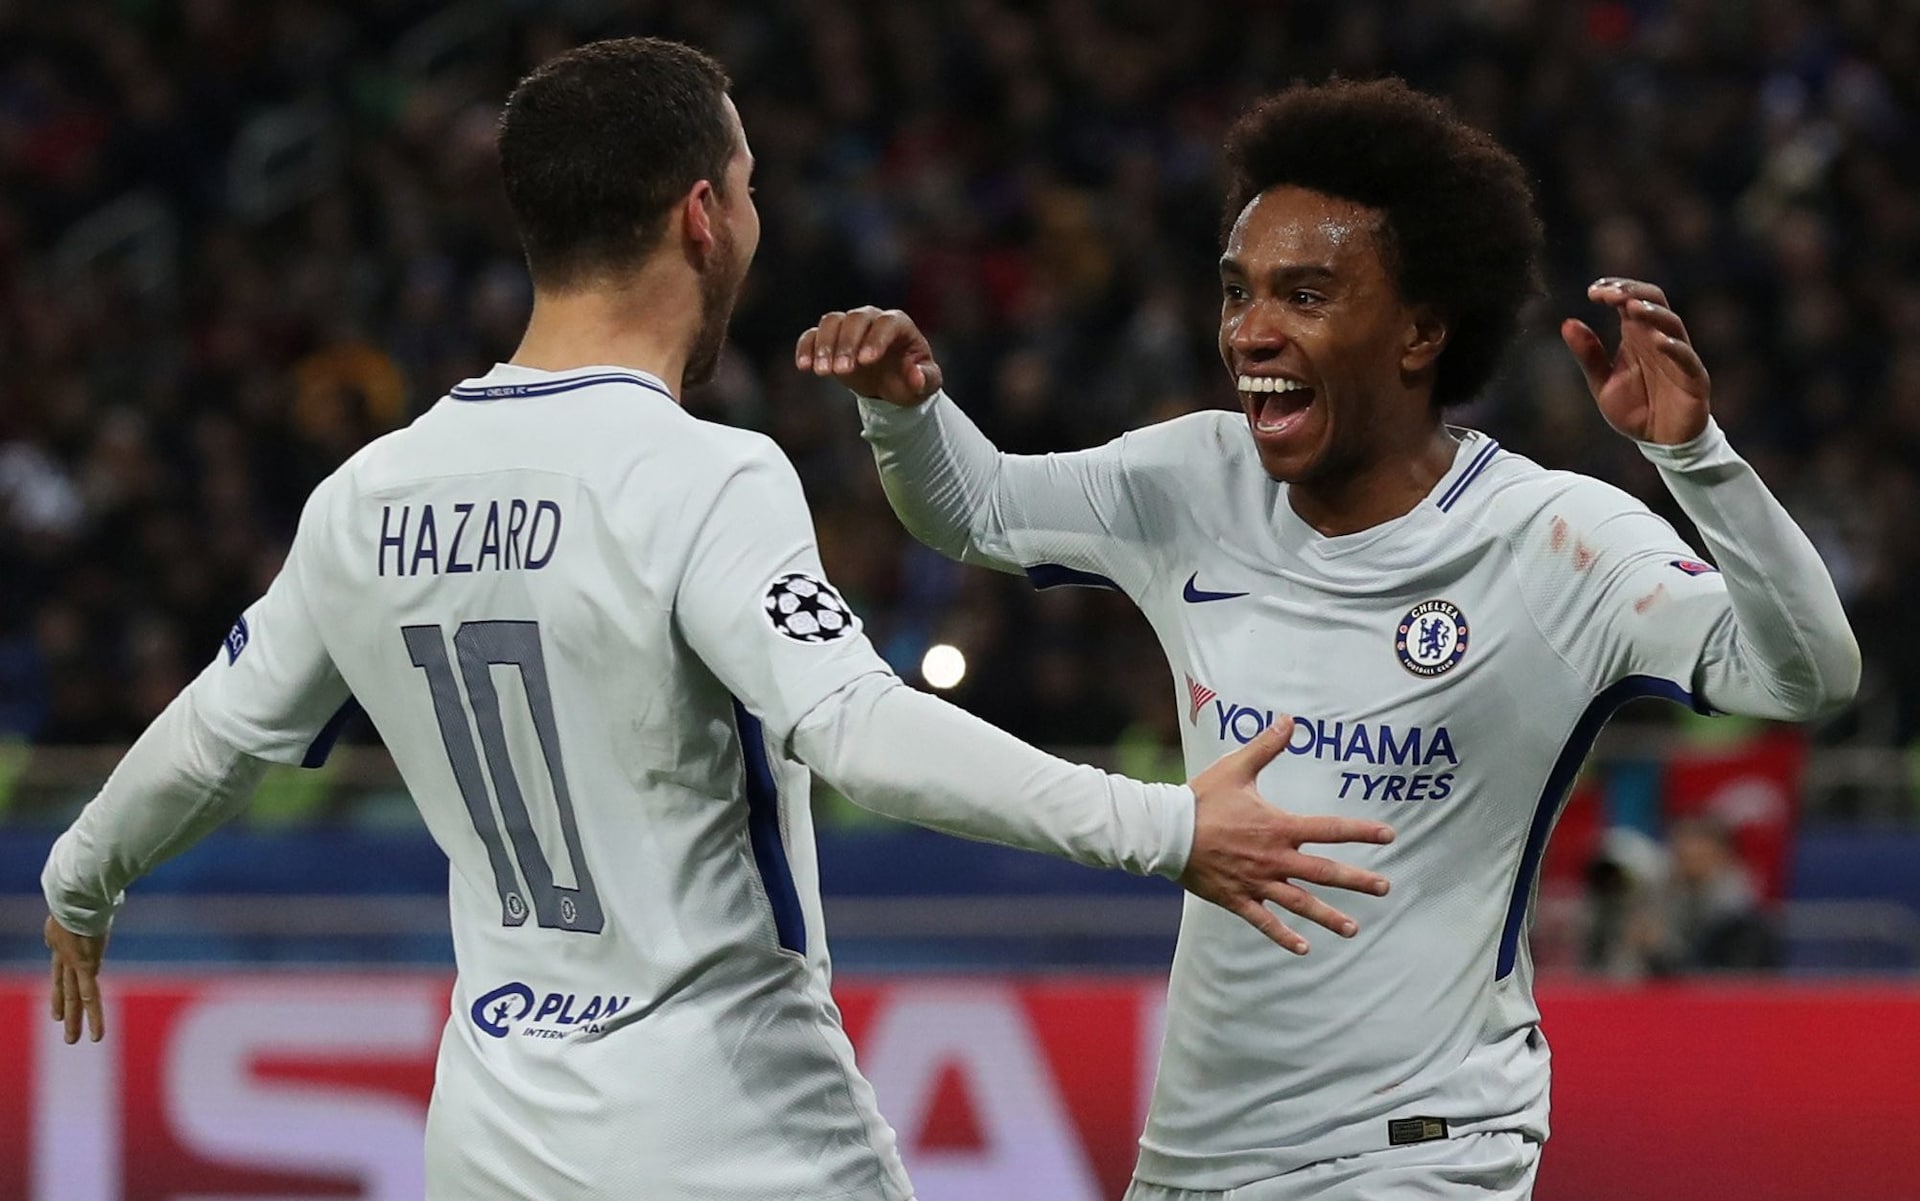 Chelsea remain best equipped among chasing pack to prevent Man City's title procession